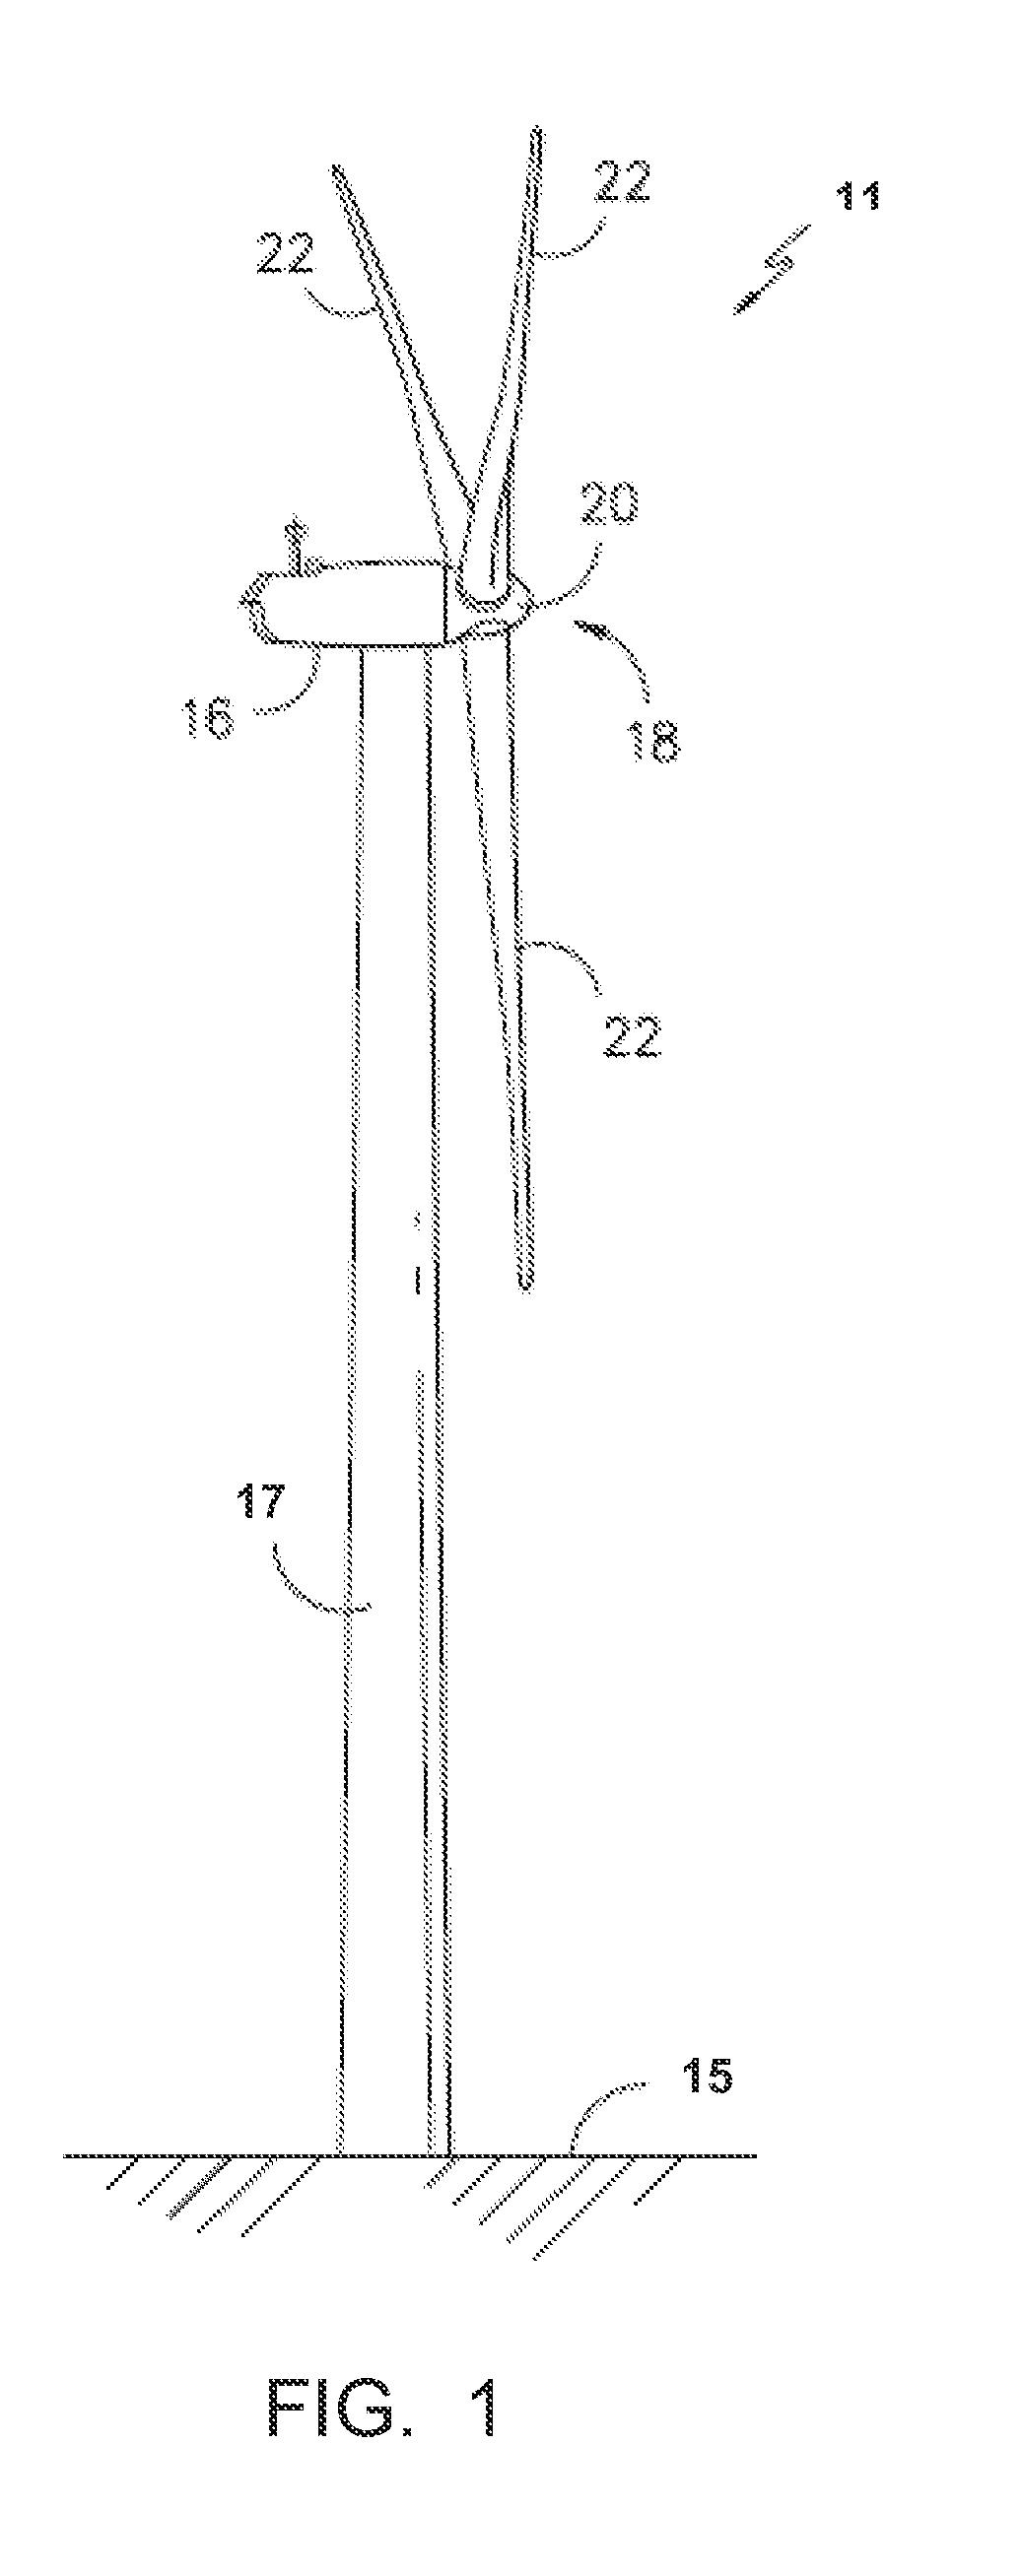 Power converter with a multi-level bridge topology and control method